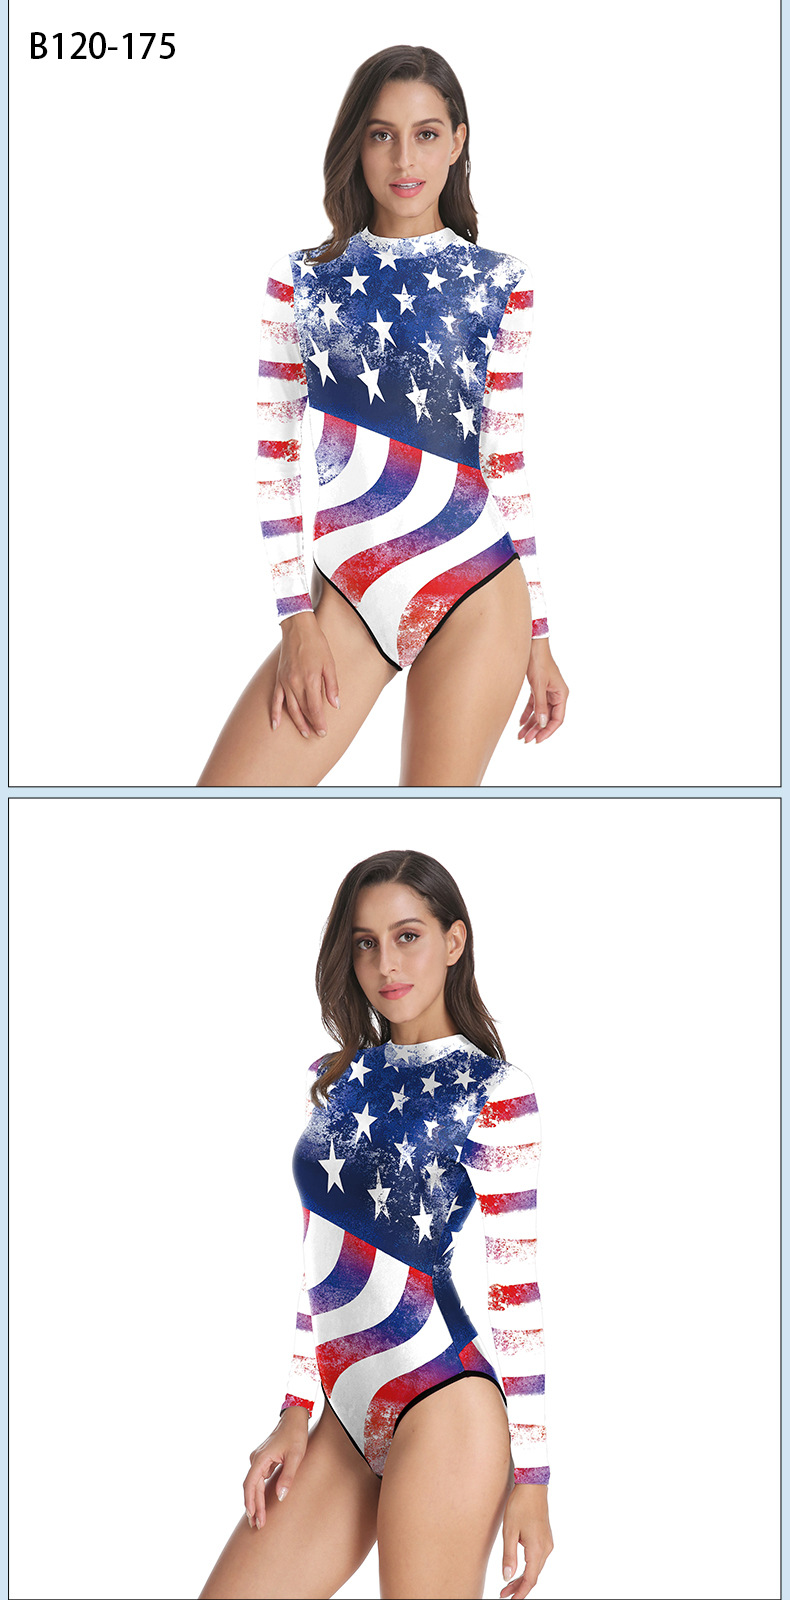 Independence Day USA FLAG 3D print one pieces beach wear women - model show